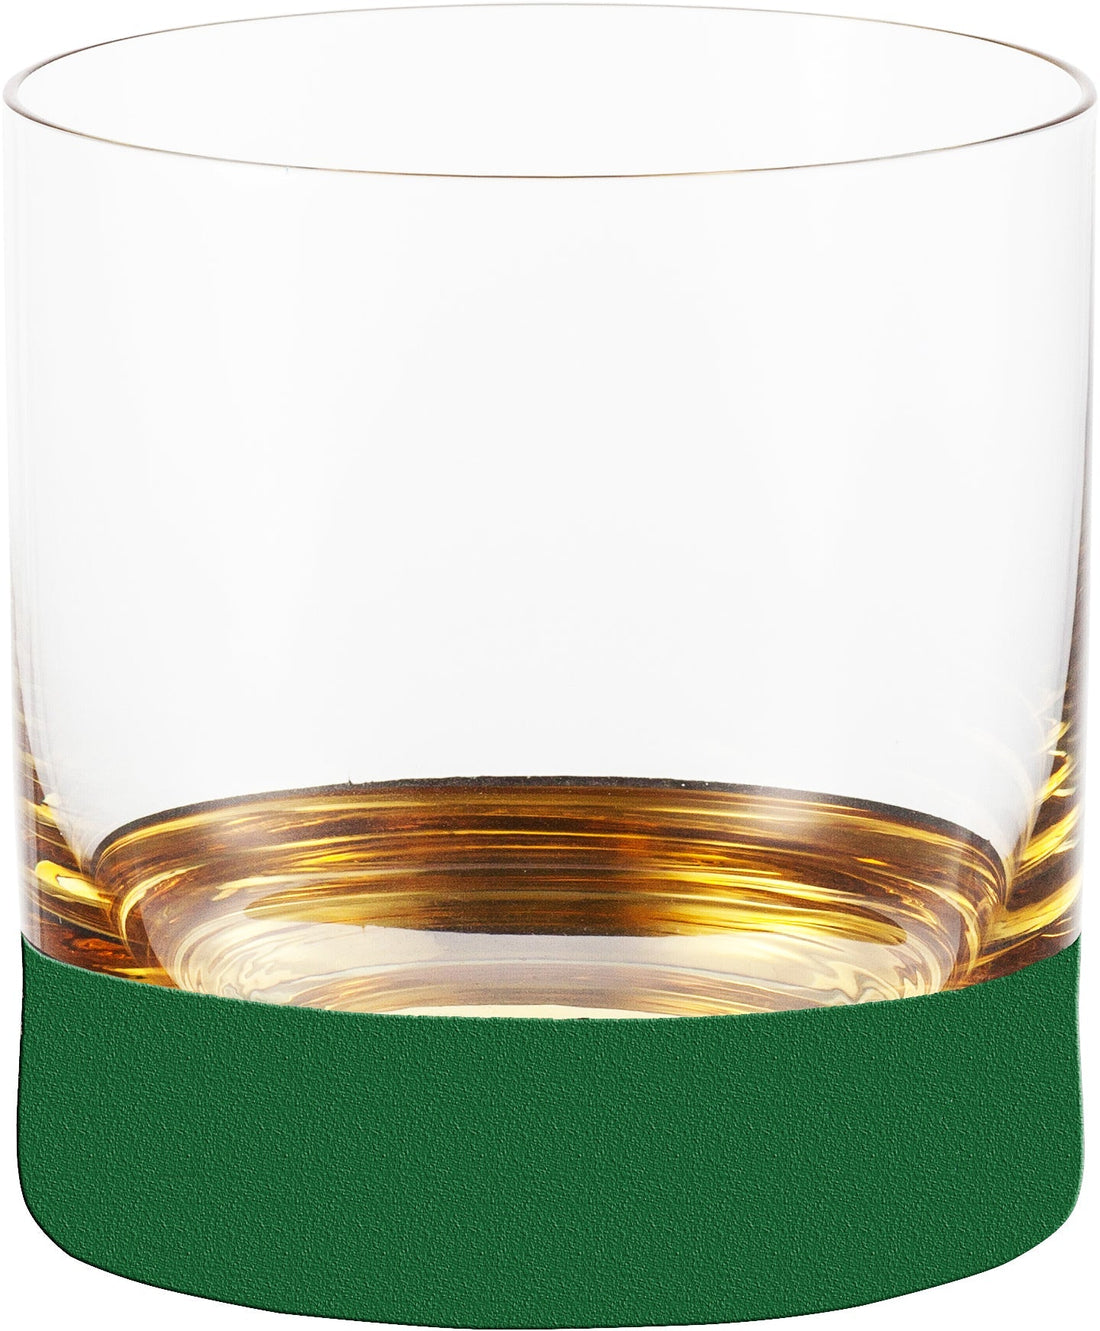 ORO24k Crystal 24k Wiskey/ Double Old Fashioned Set of 2 - nicolettemayer.com